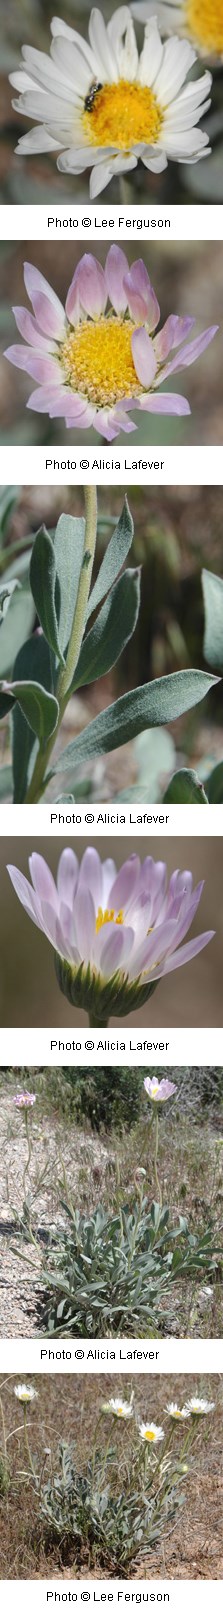 multiple images of pale pinkish blue flowers with a yellow center